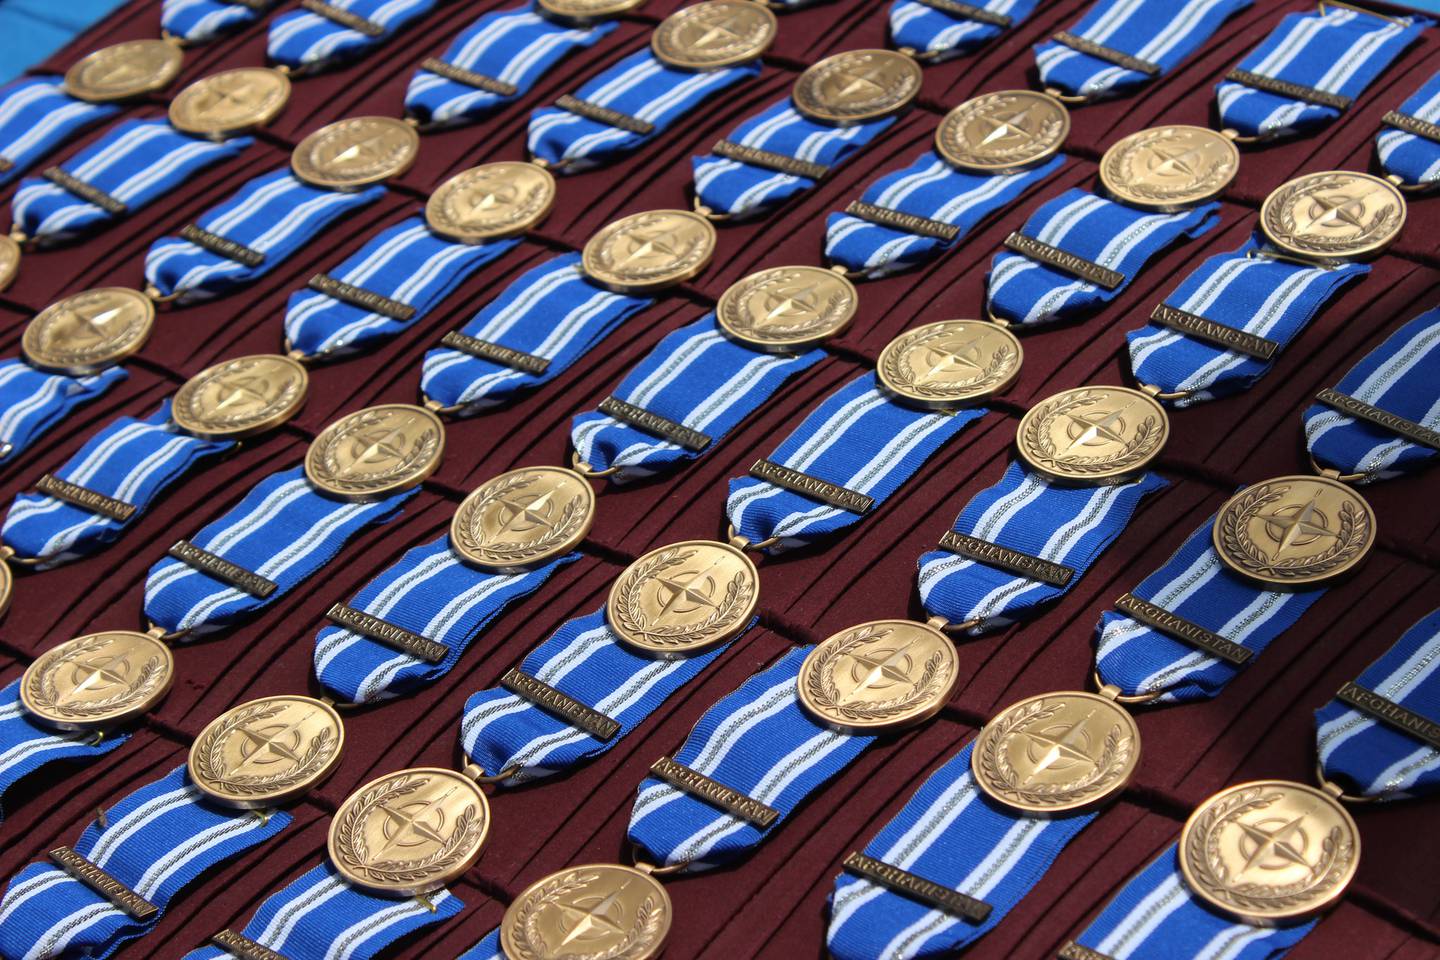 Resolute Support personnel receive NATO medals on April 27, 2016.